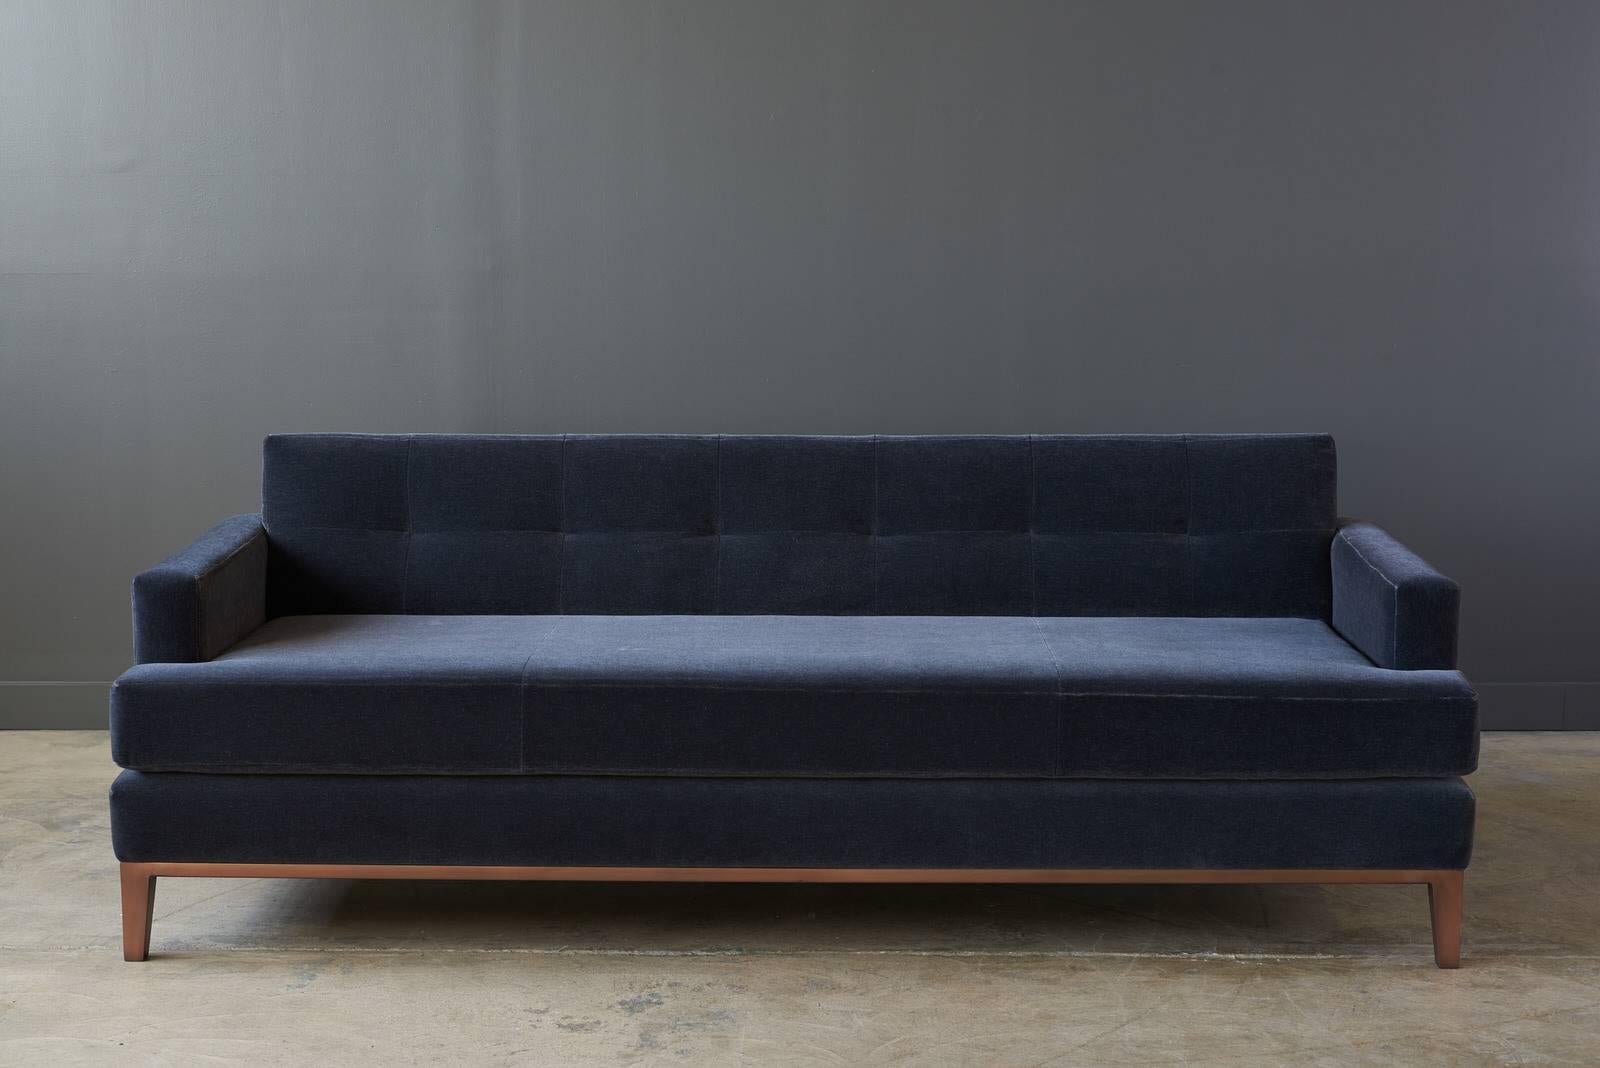 A fine modern designed sofa, the Sullivan sofa sits on a burnished copper base and upholstered in Maharam Mohair supreme slate 112.

Shown in burnished copper base and Maharam Mohair supreme slate 112.
Measure: 84 in x 35 in x 26.5 in H.

Each